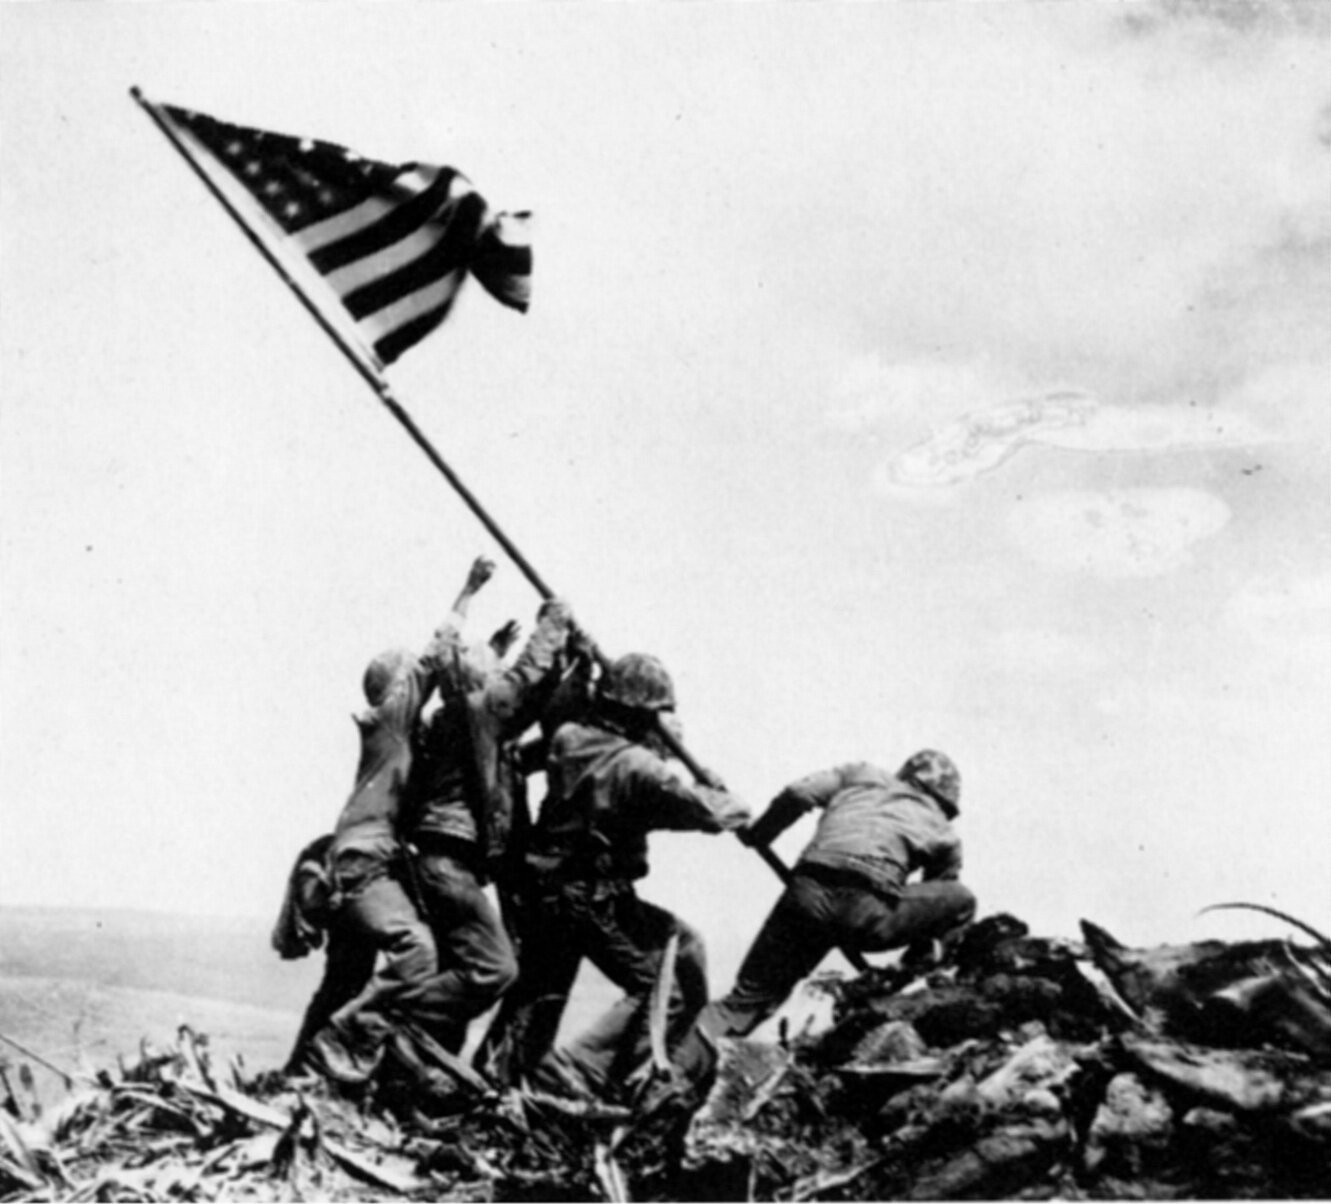 The first flag raised on Iwo Jima during WWII, provided by Annin Flagmakers.